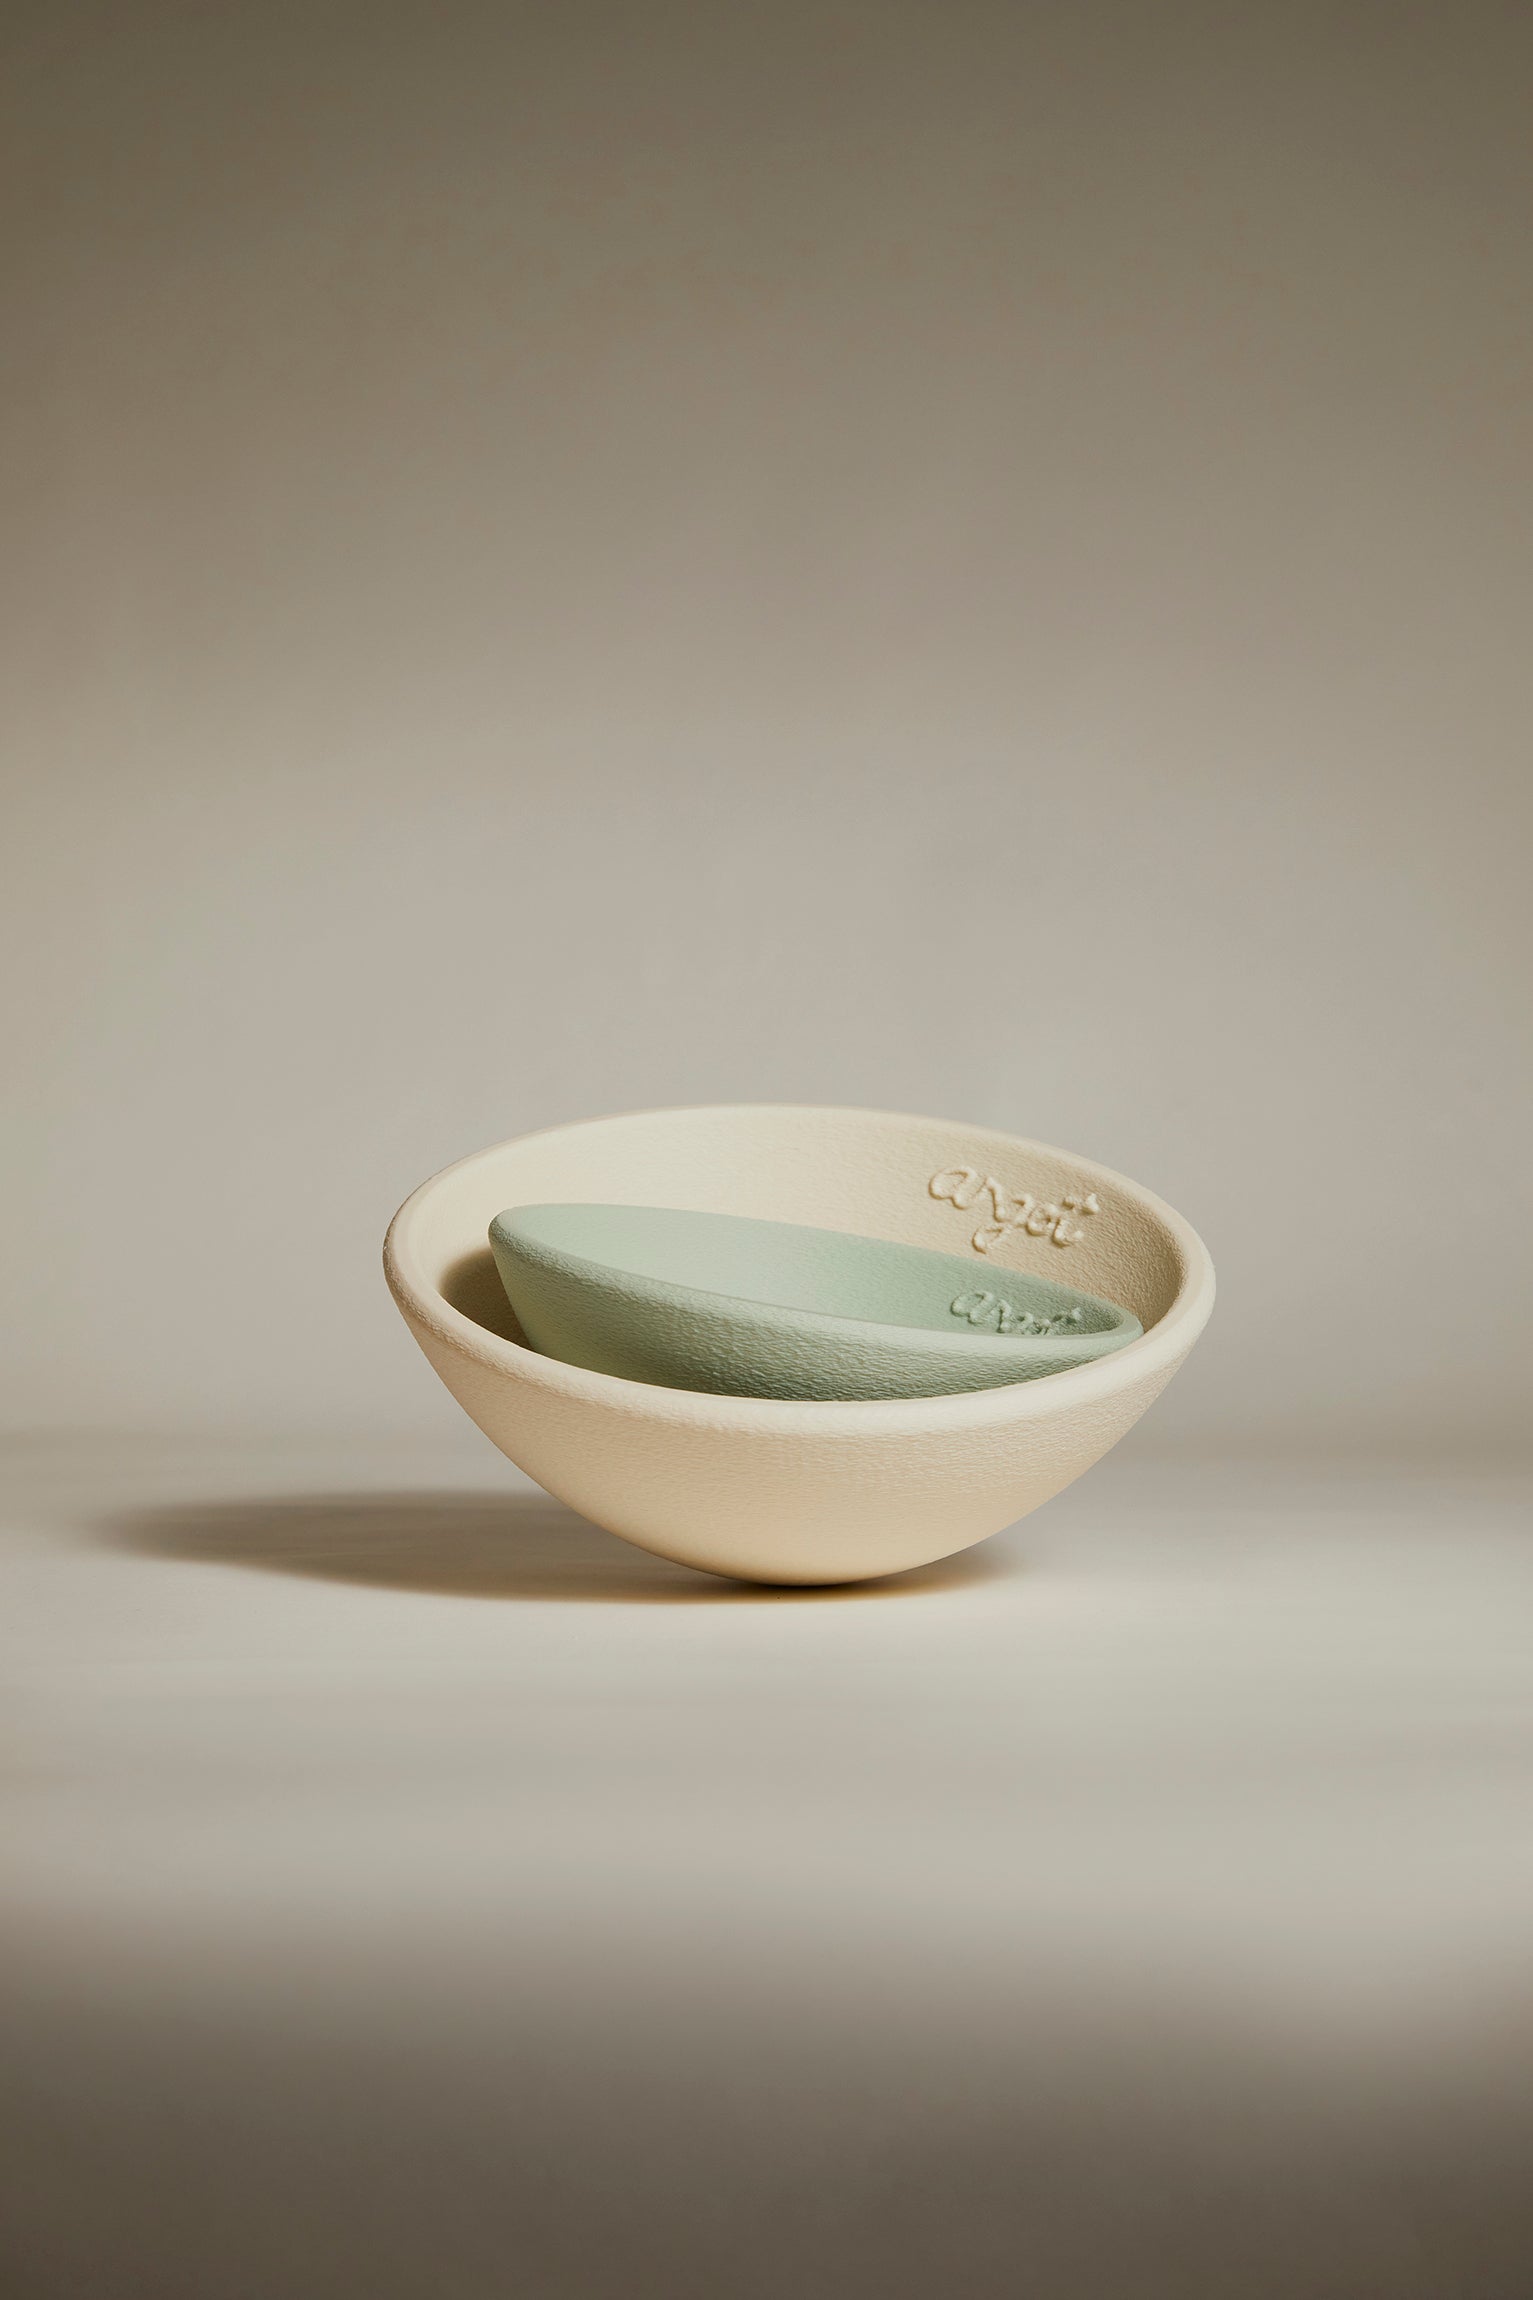 Neutral colored bowls